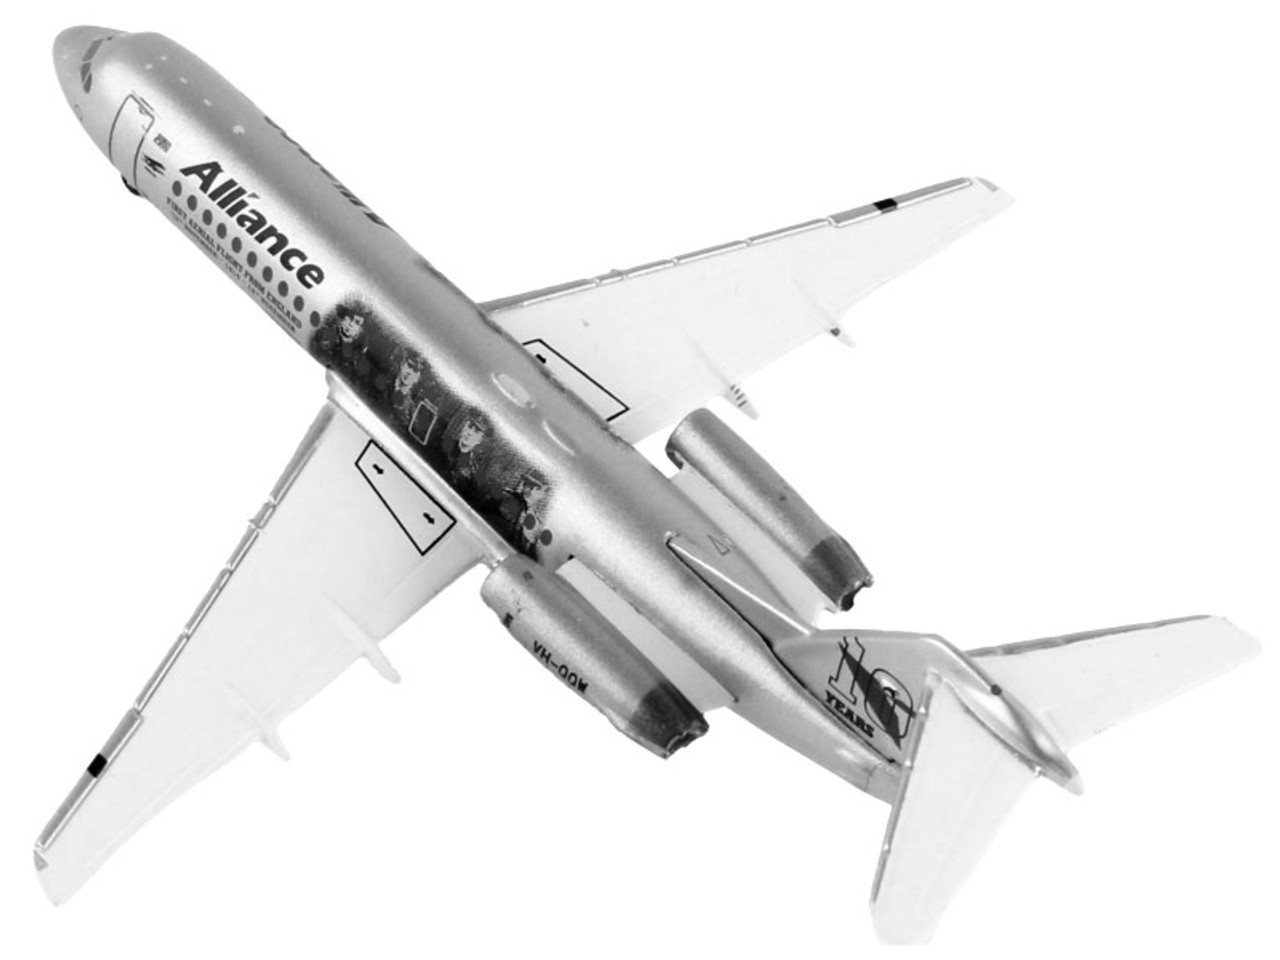 Fokker F70 Commercial Aircraft "Alliance Airlines - 100 Years First Flight from England" Silver Metallic 1/400 Diecast Model Airplane by GeminiJets